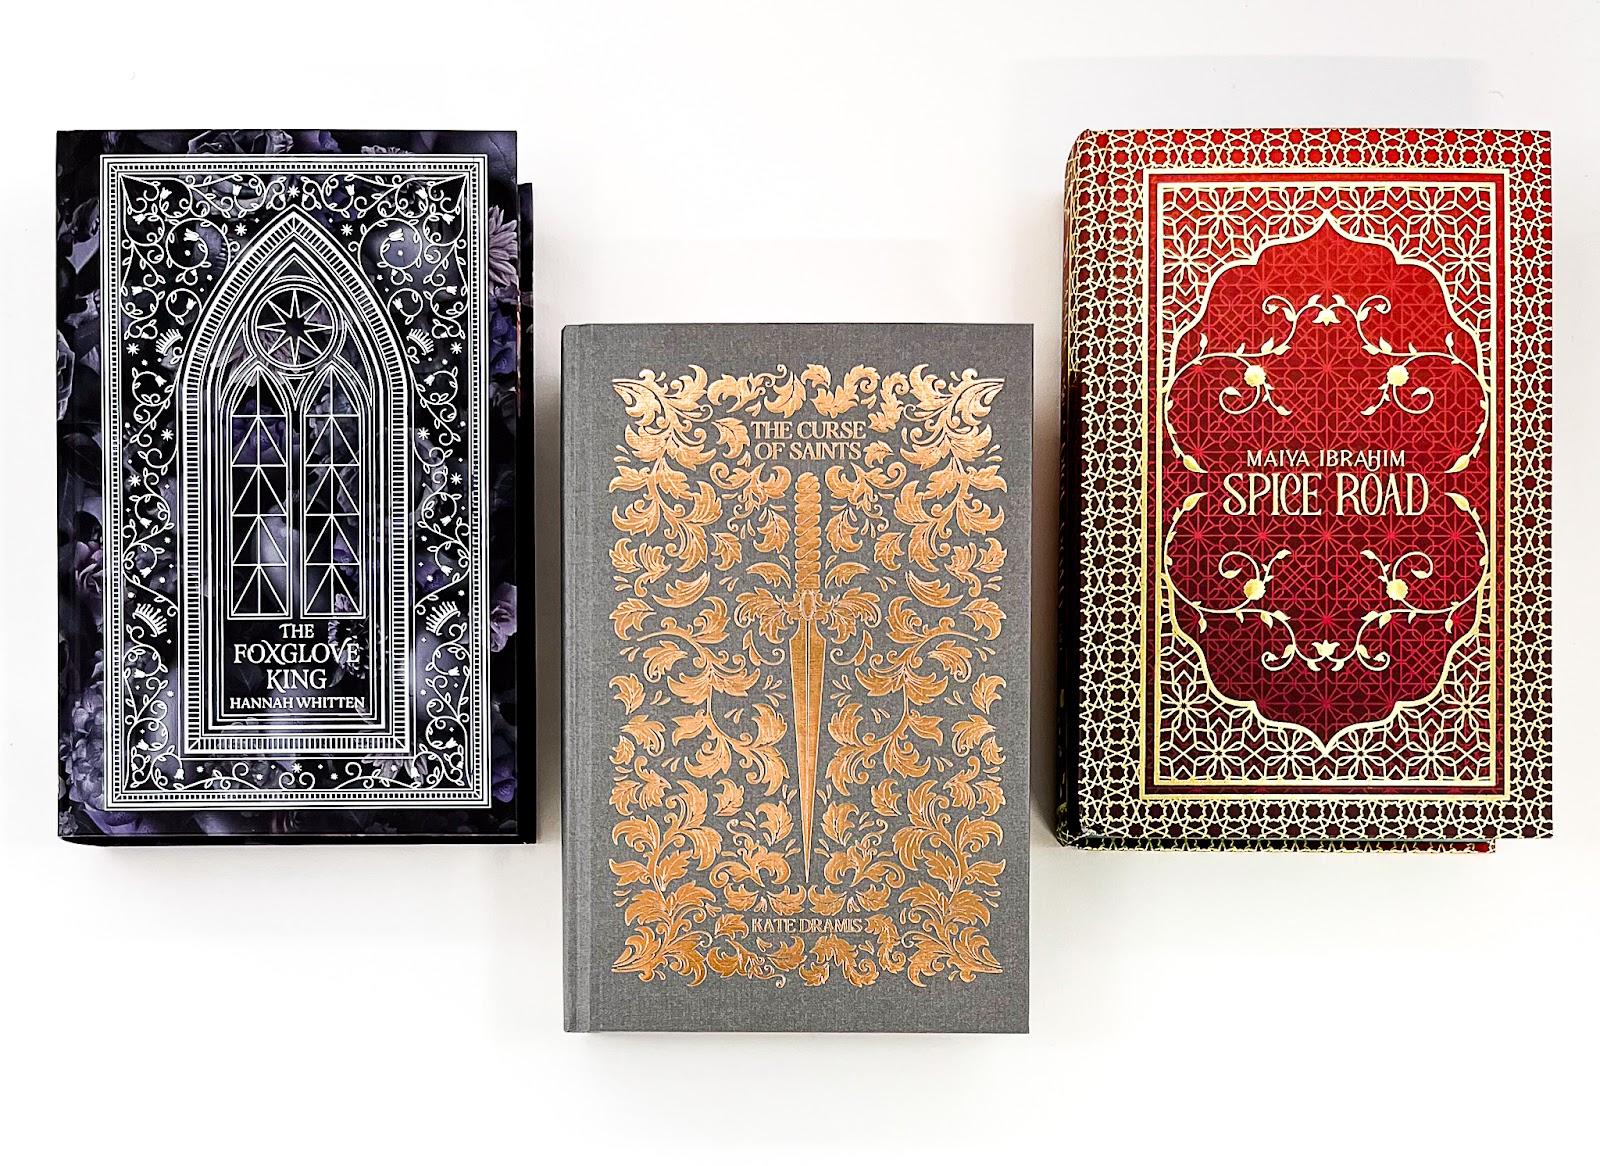 Cover images of hardbound books.